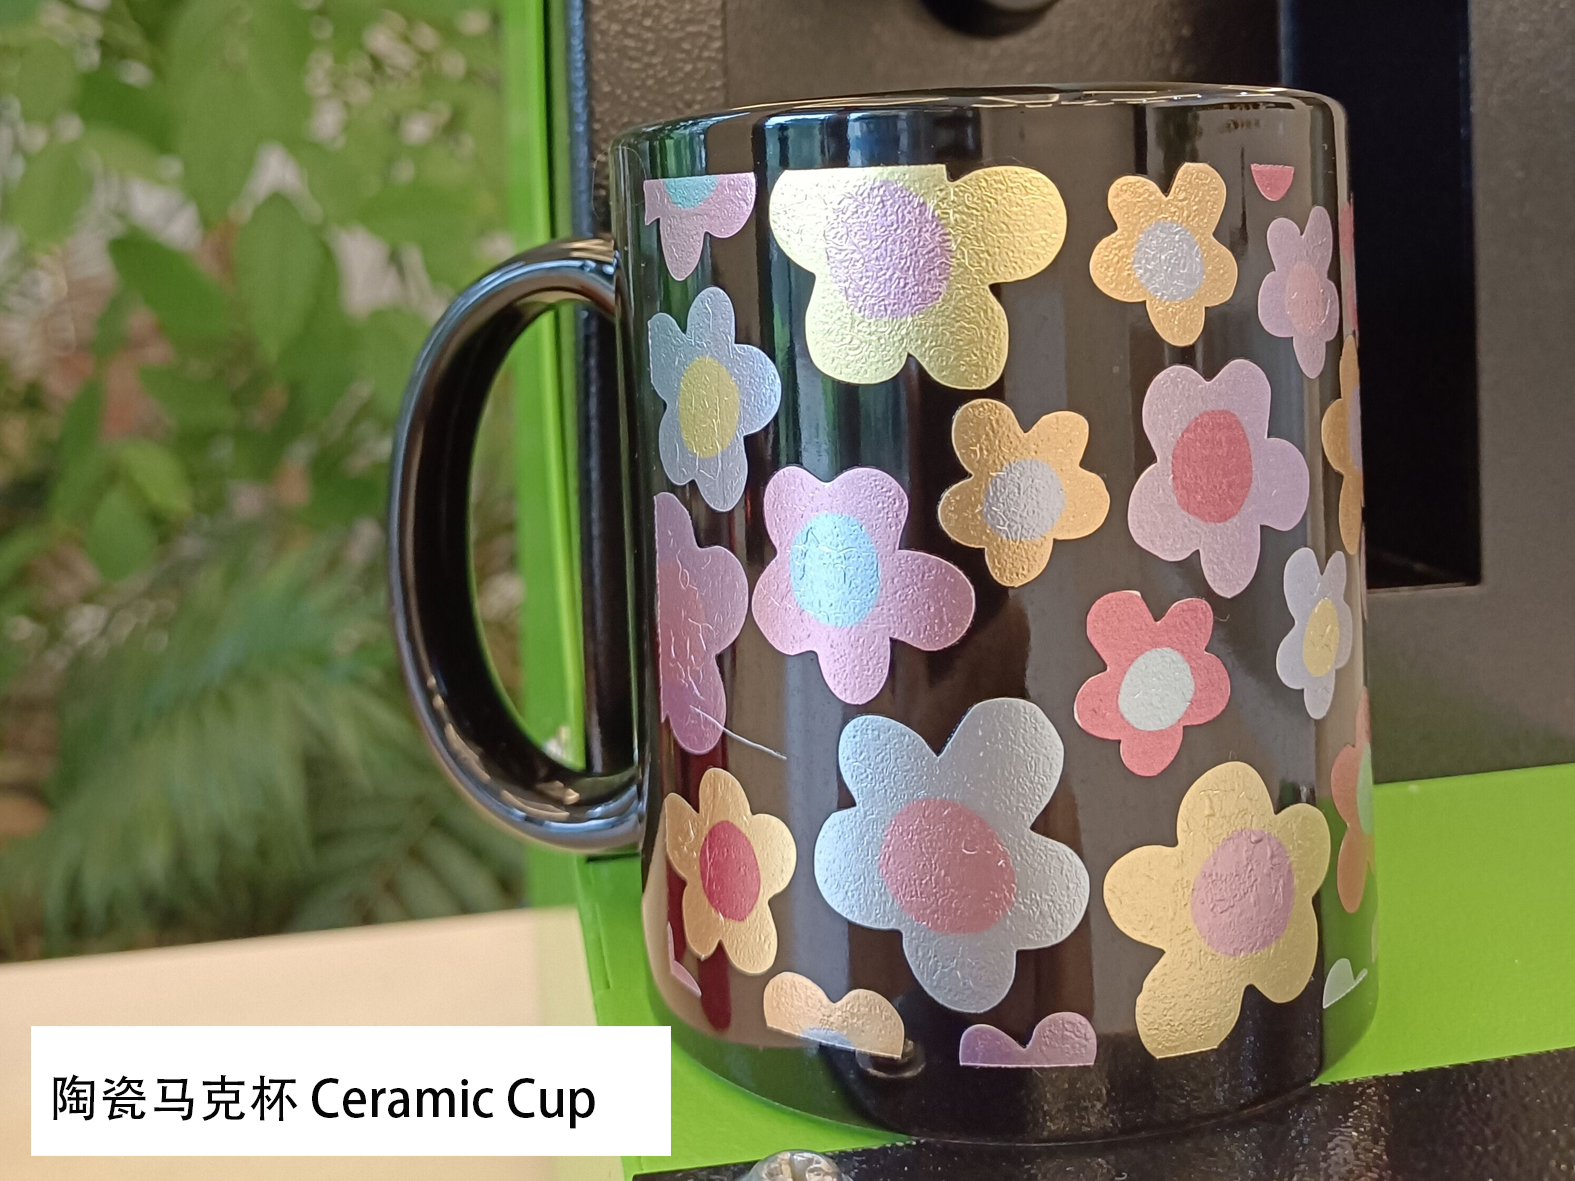 https://www.alizarinchina.com/solutions/what-investment-is-best-for-beginner-to-make-the-colorful-logo-of-ceramic-mug/